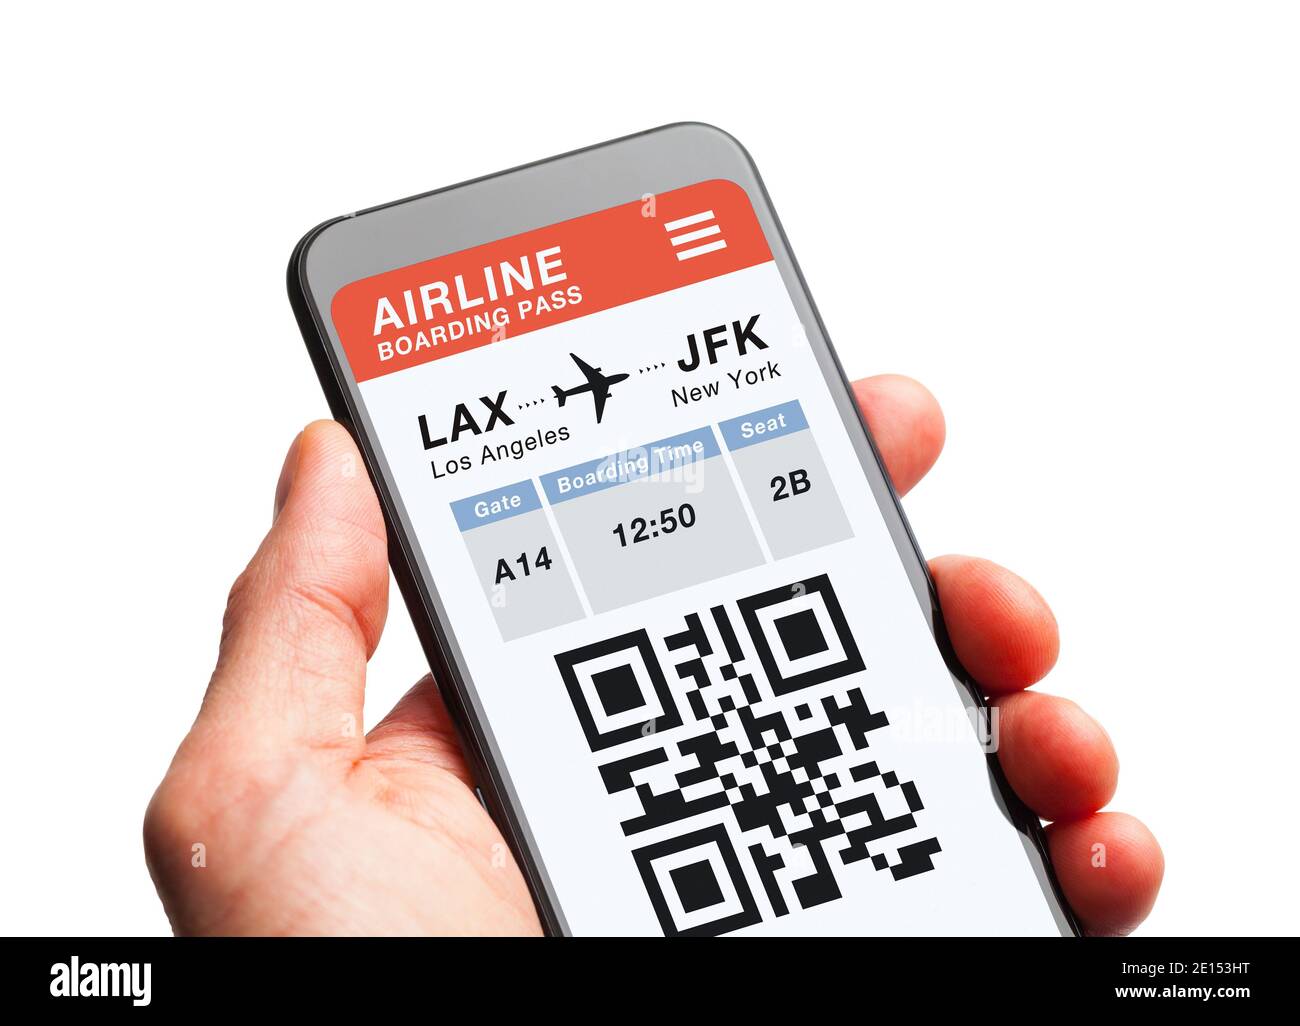 Hand Holding a Smart Phone with Airplane Boarding Pass on it. Stock Photo